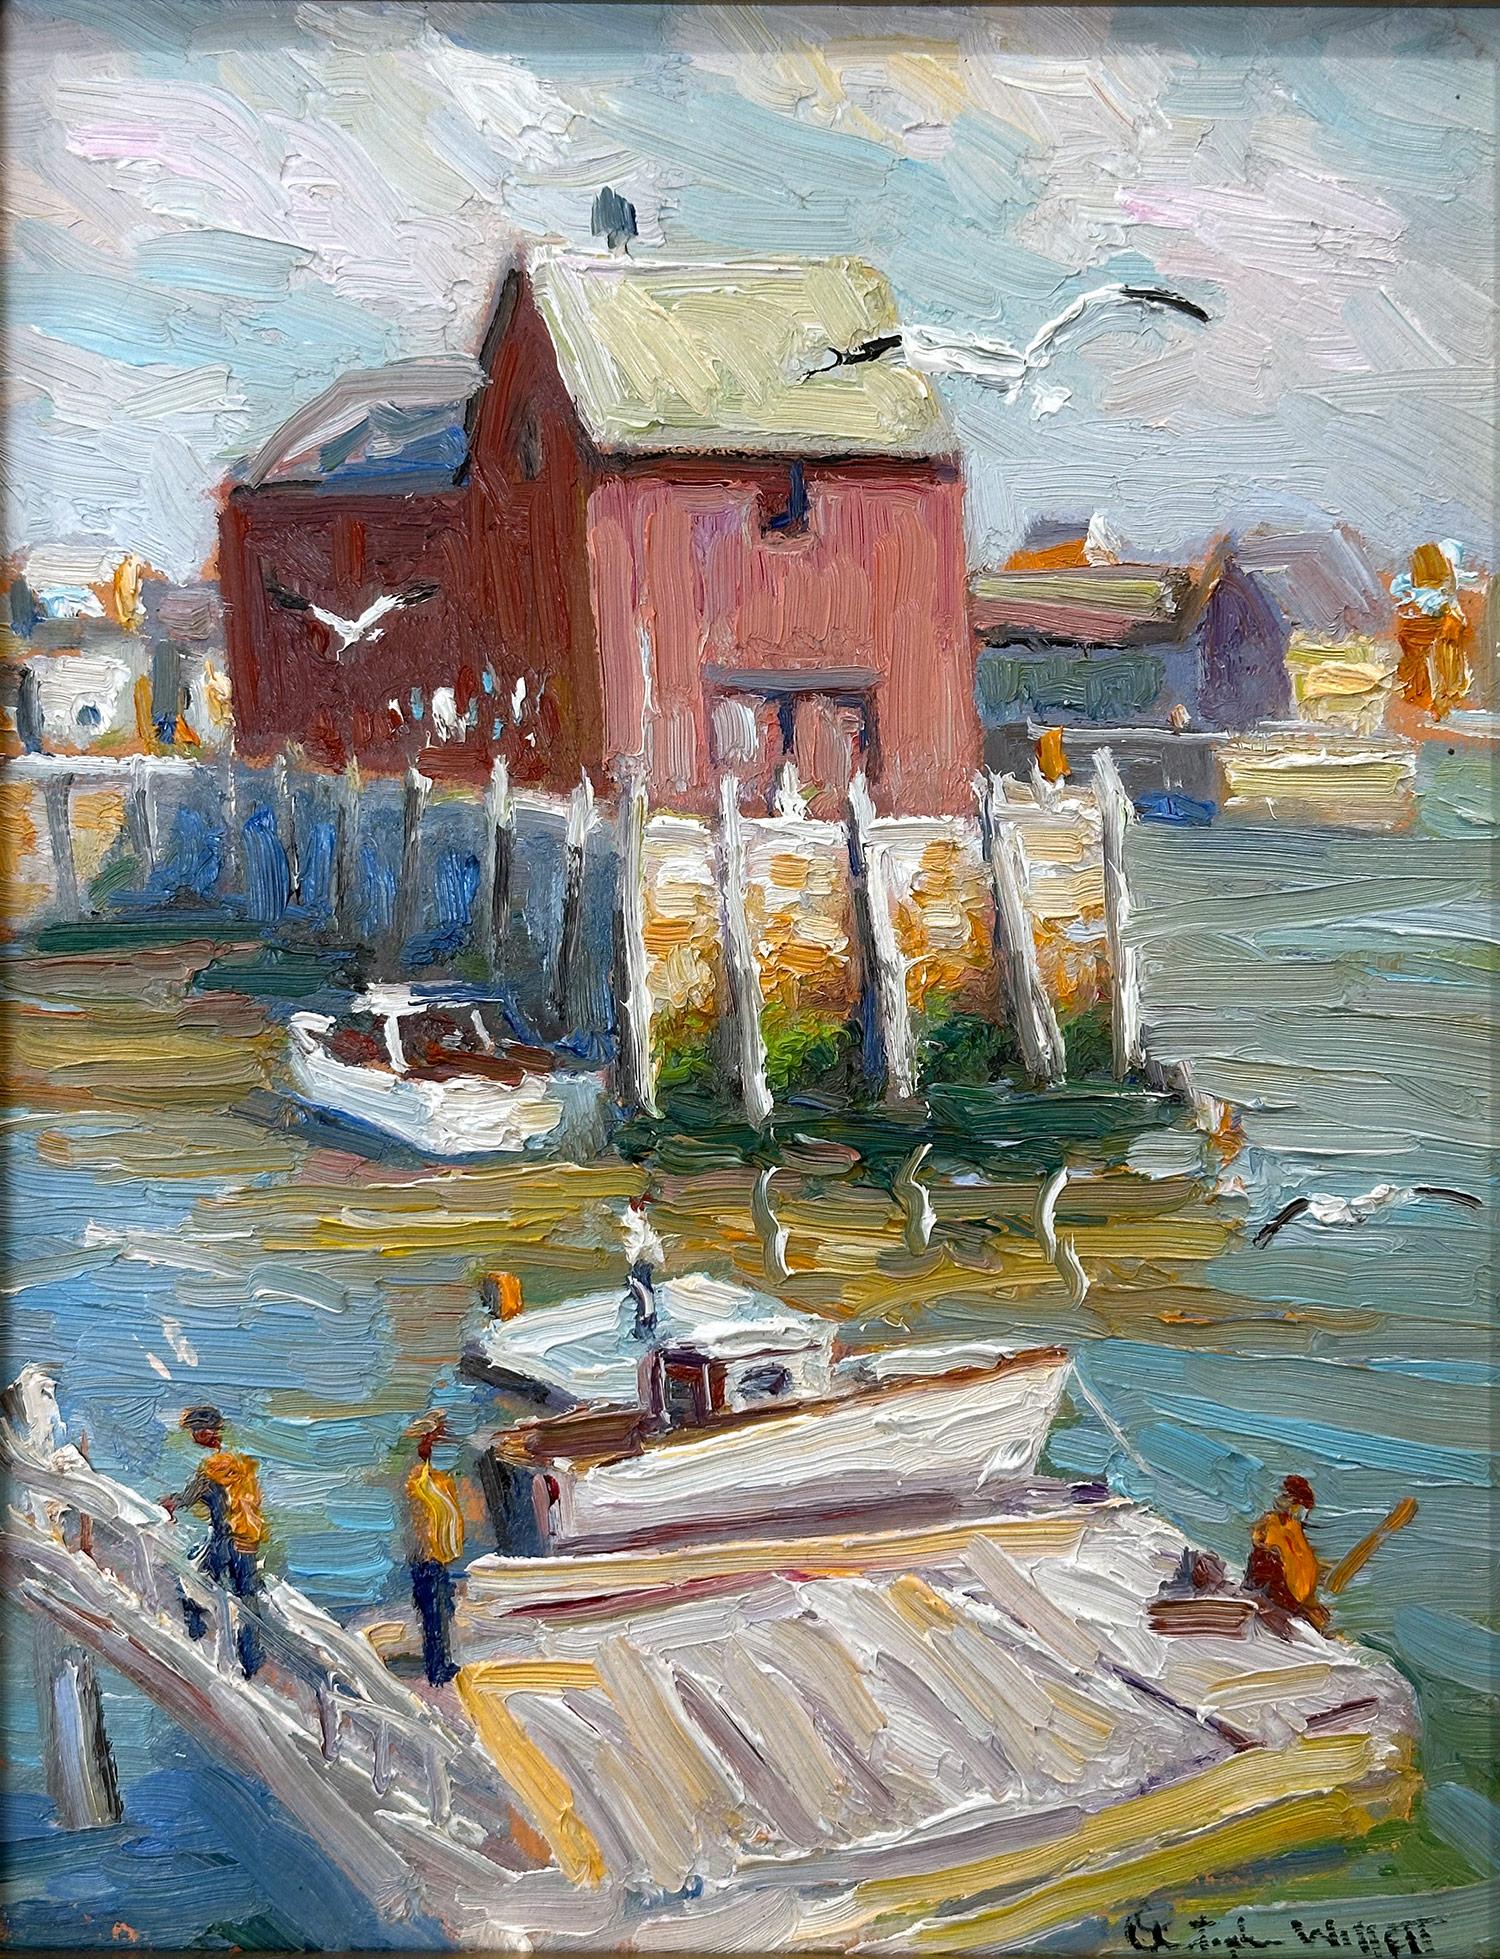 Impressionist pastoral scene of a quaint marine view of the docks and fishermen of the iconic fishing shack on Bearskin Neck located on Bradley Wharf in the harbor town of Rockport, Massachusetts. Willet has portrayed this piece in a most intimate,